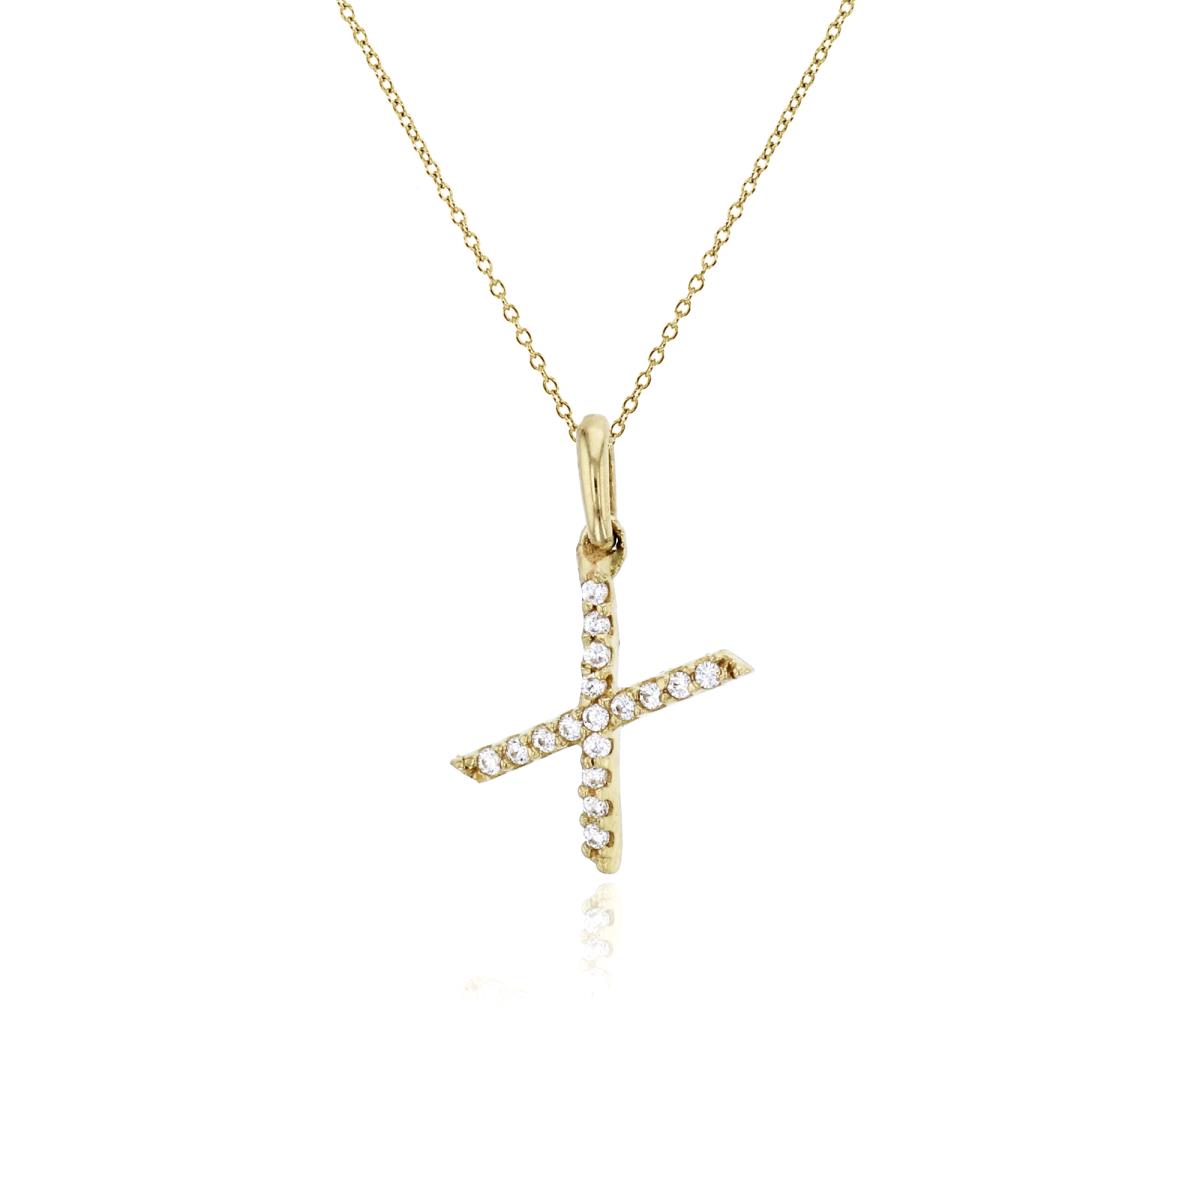 14K Yellow Gold 17x12mm Micropave "X" Dangling 18" Necklace